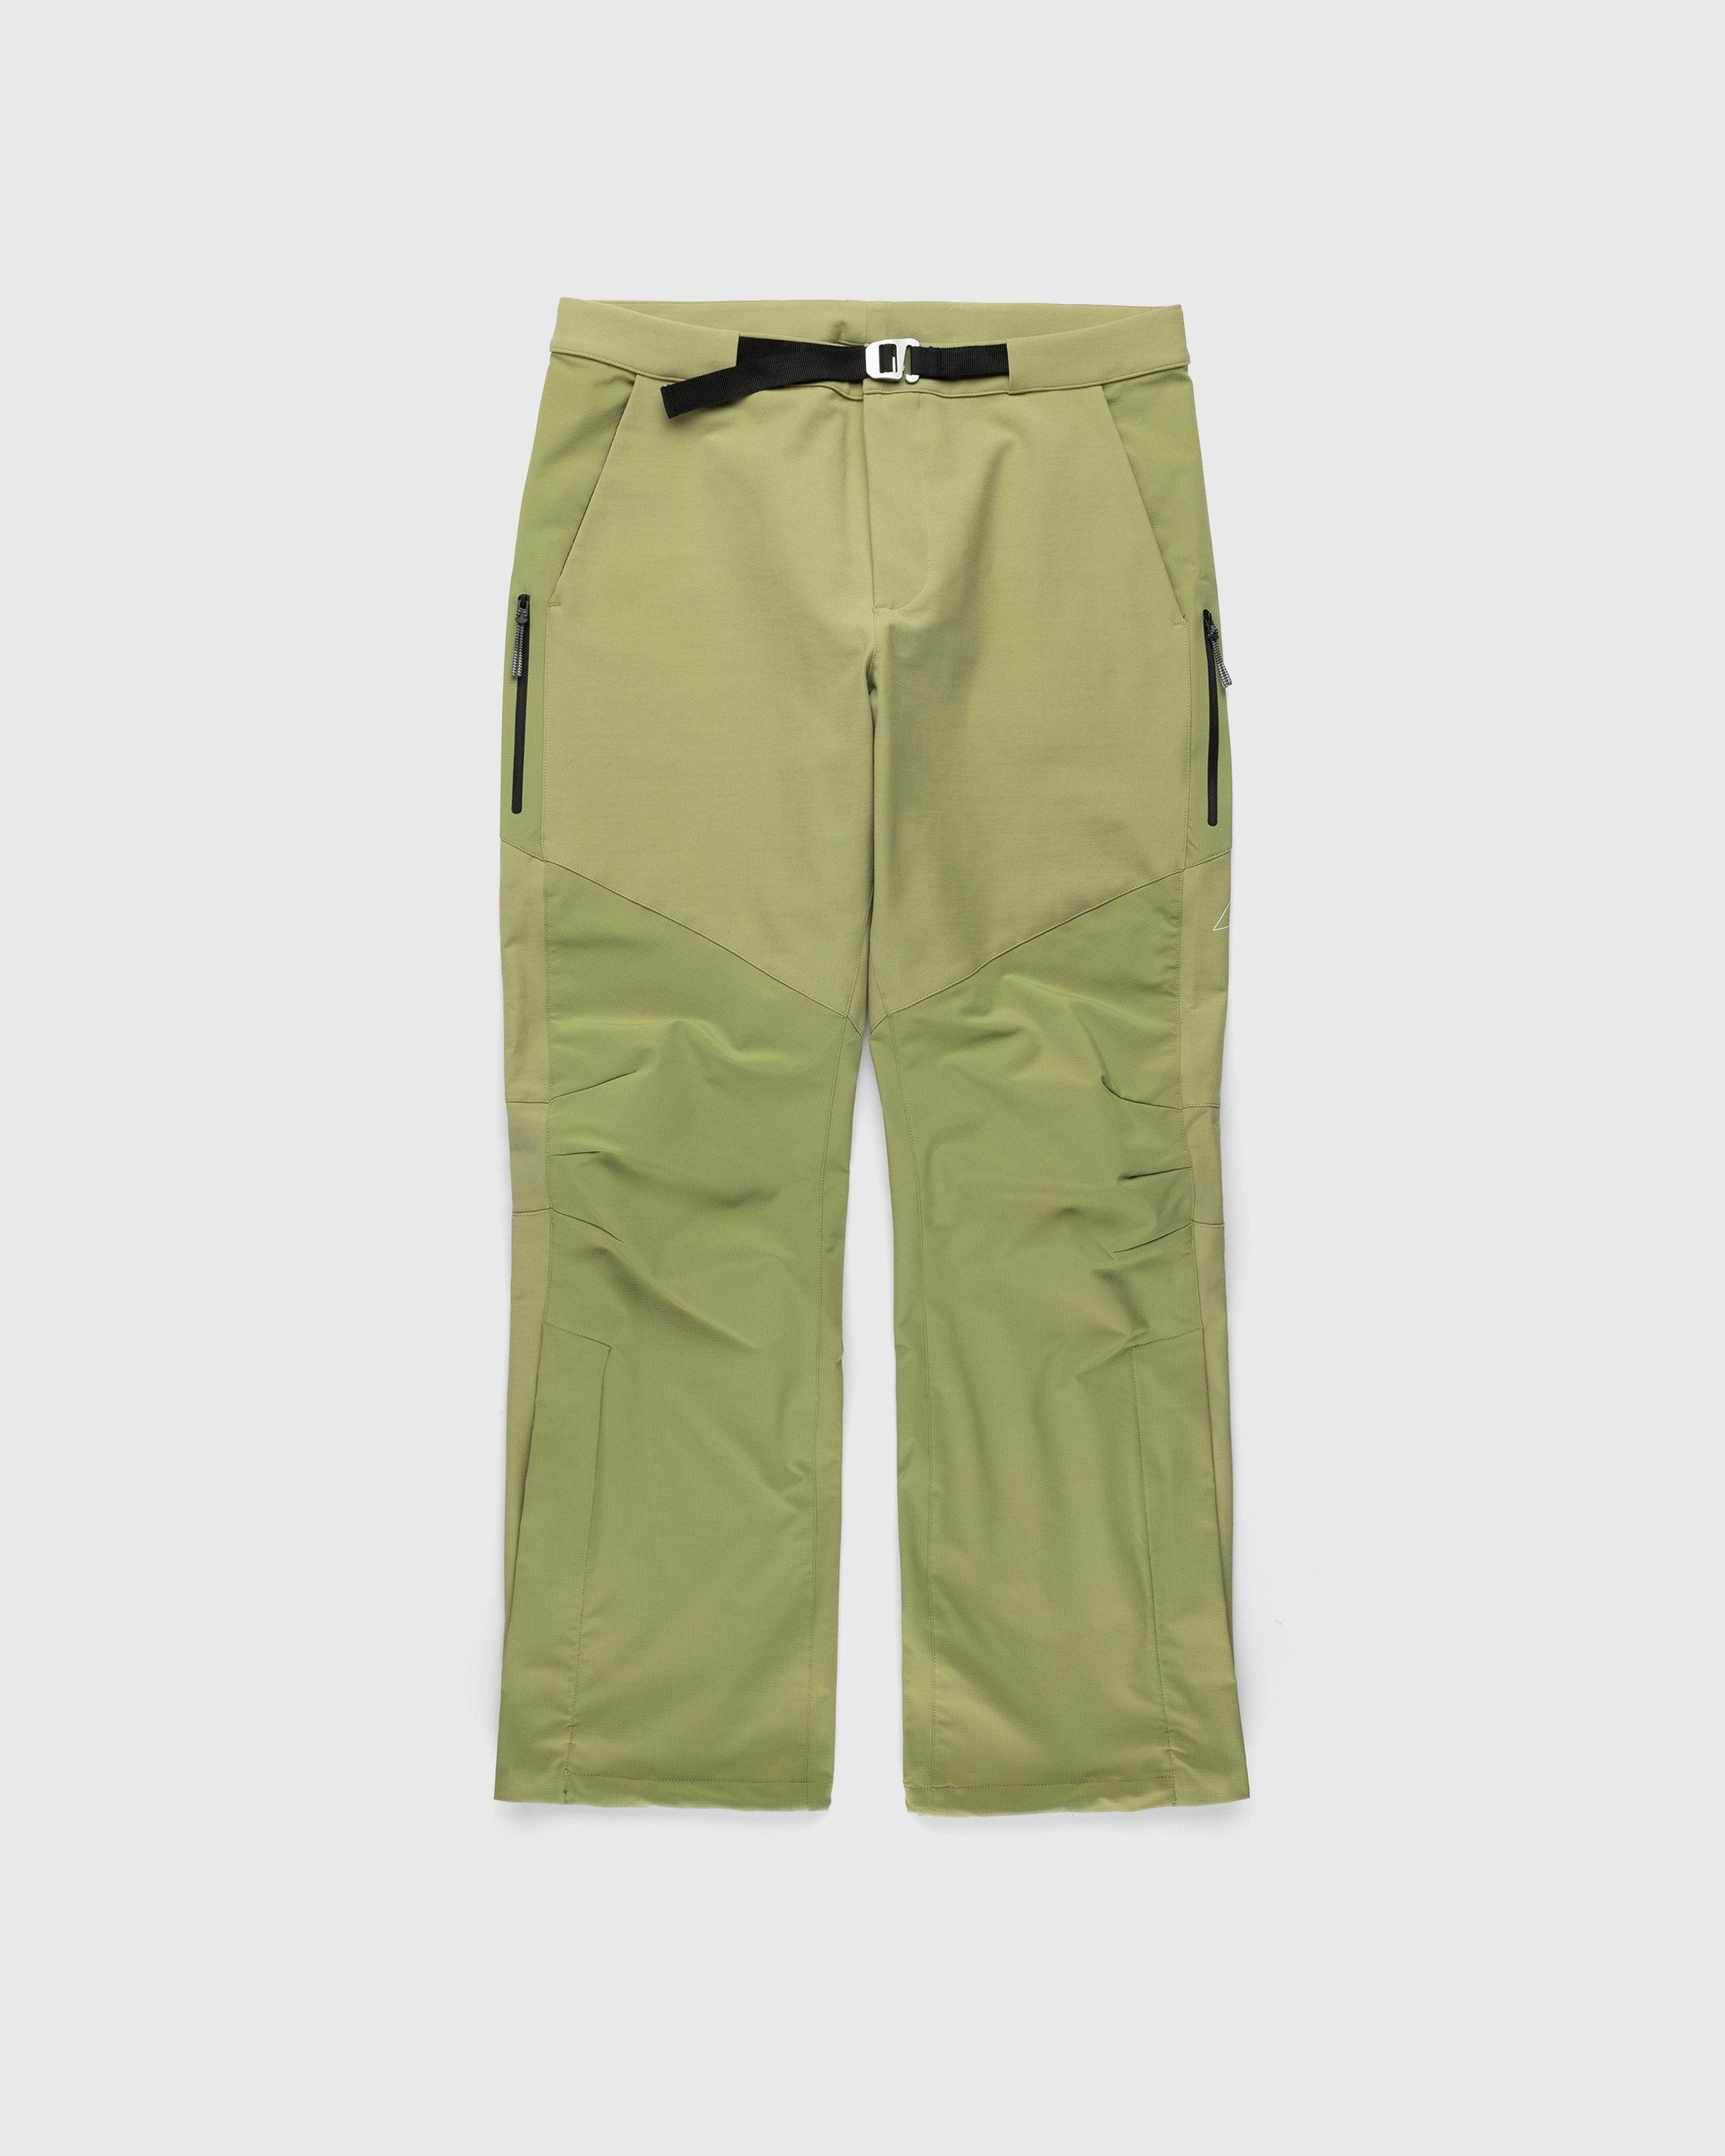 ROA – Technical Trousers Green | Highsnobiety Shop